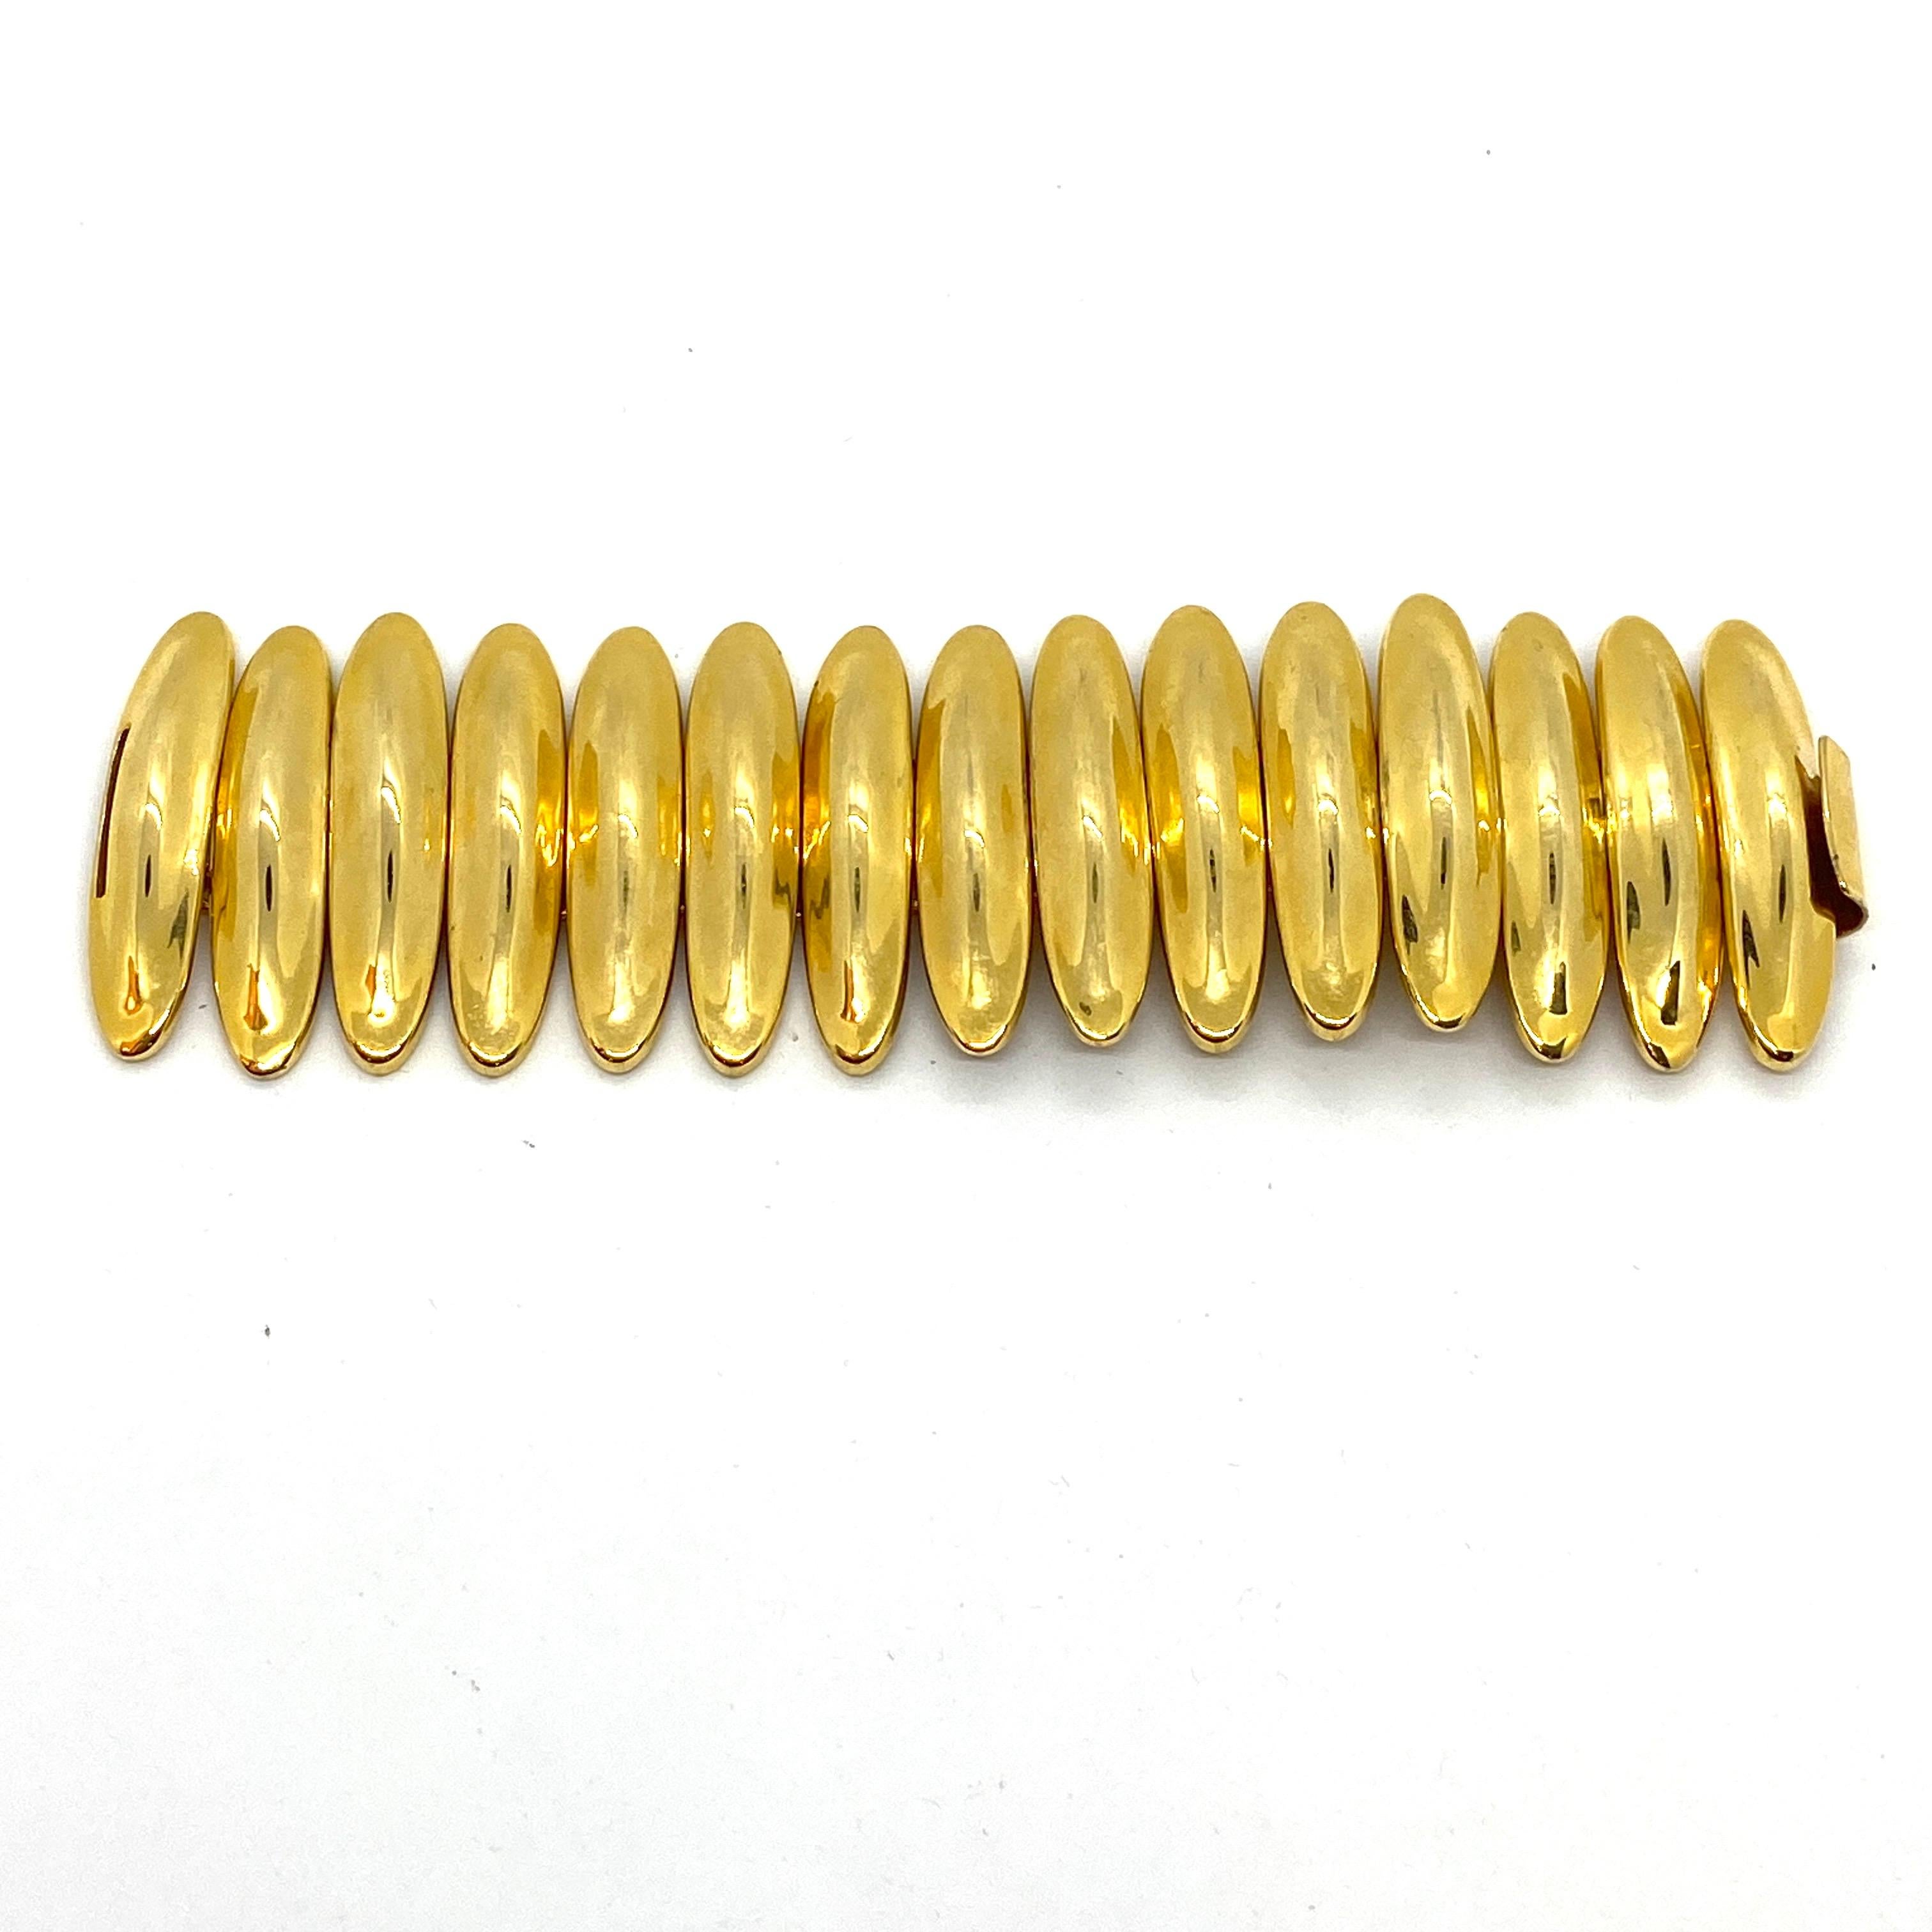 The Robert Lee Morris Caterpillar bracelet is a shiny 18k gold plated brass link construction that is very fluid, flexible and very comfortable to wear. The width of the gleaming golden bracelet is wide at 2.25